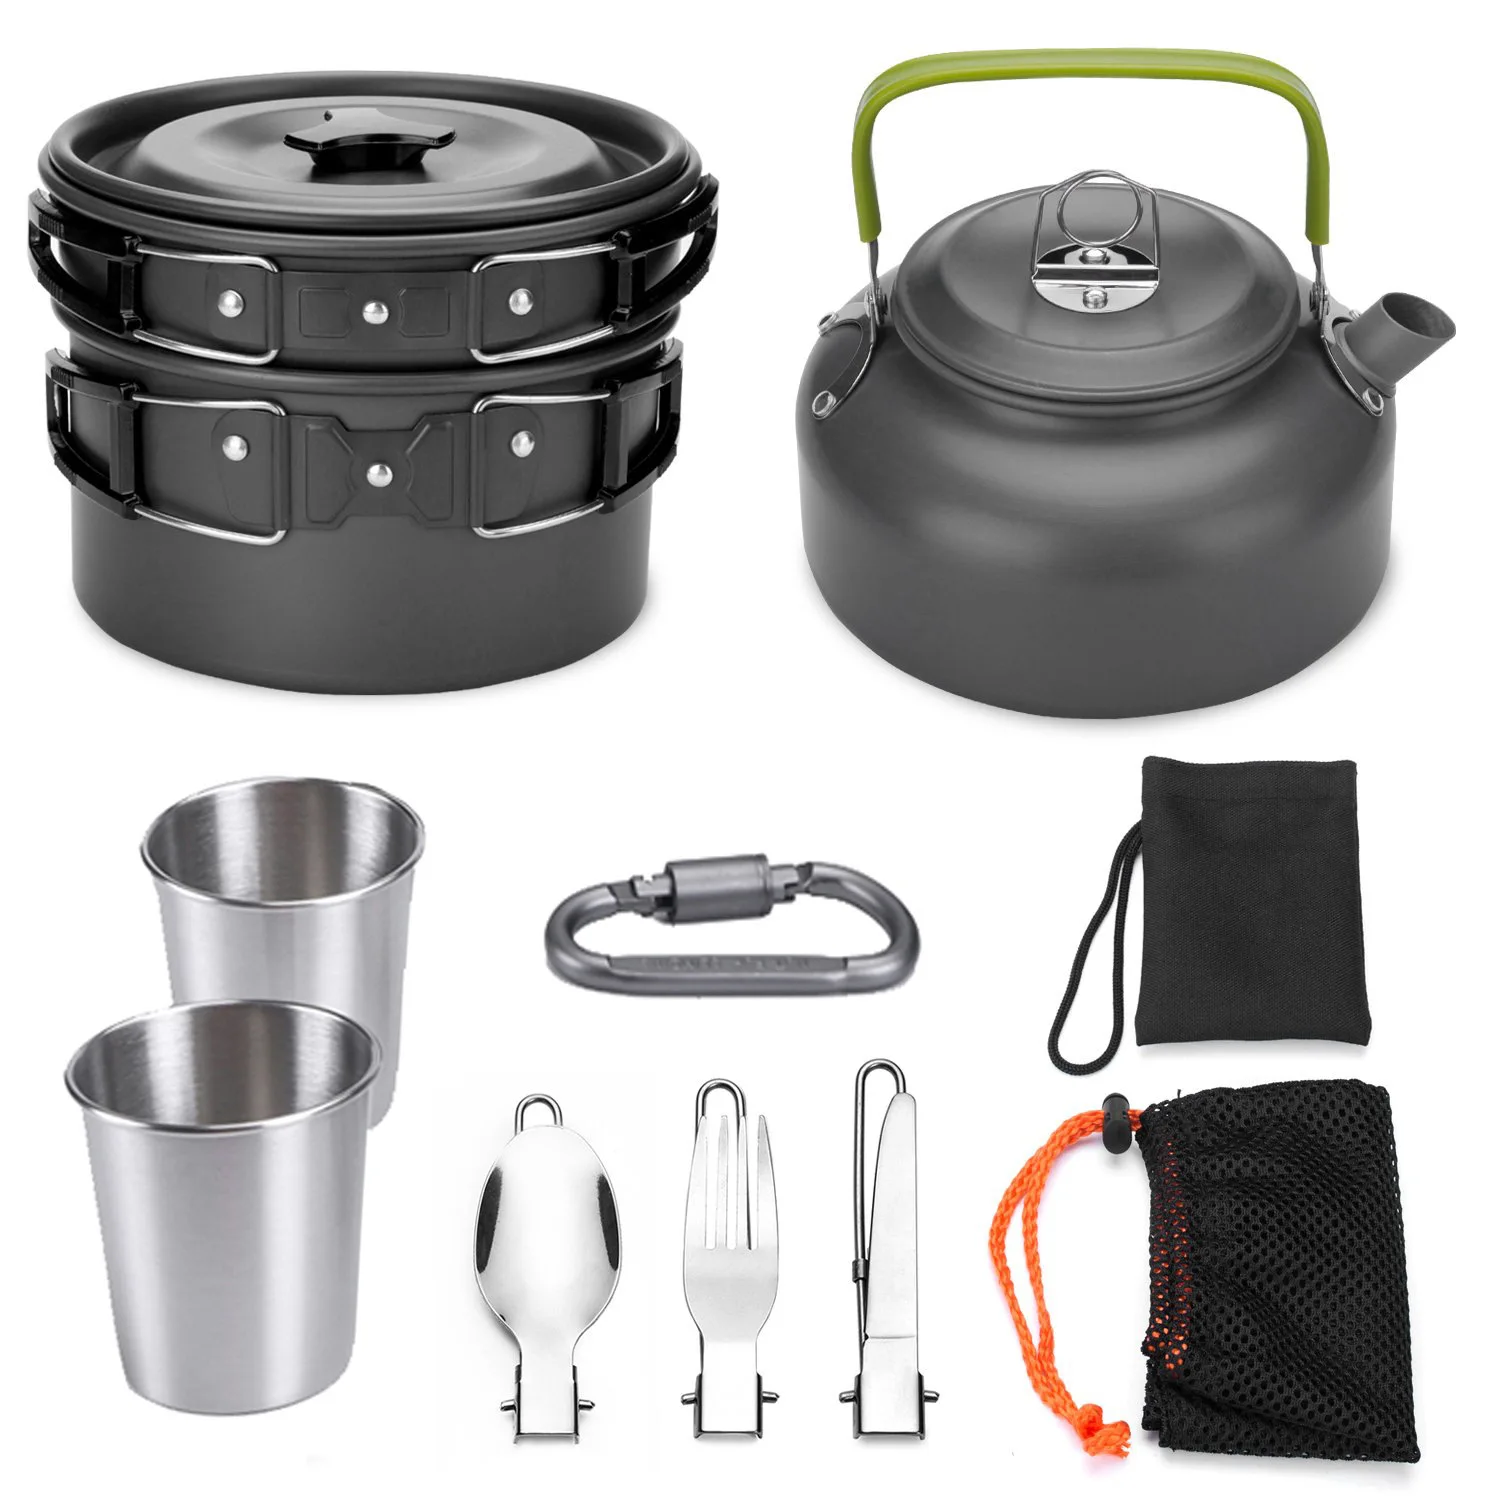 

A809 Outdoor Camping Picnic Portable 2-3 Person Pot Tea Coffee Kettle Pan Tableware Cup Combination Cooker Set